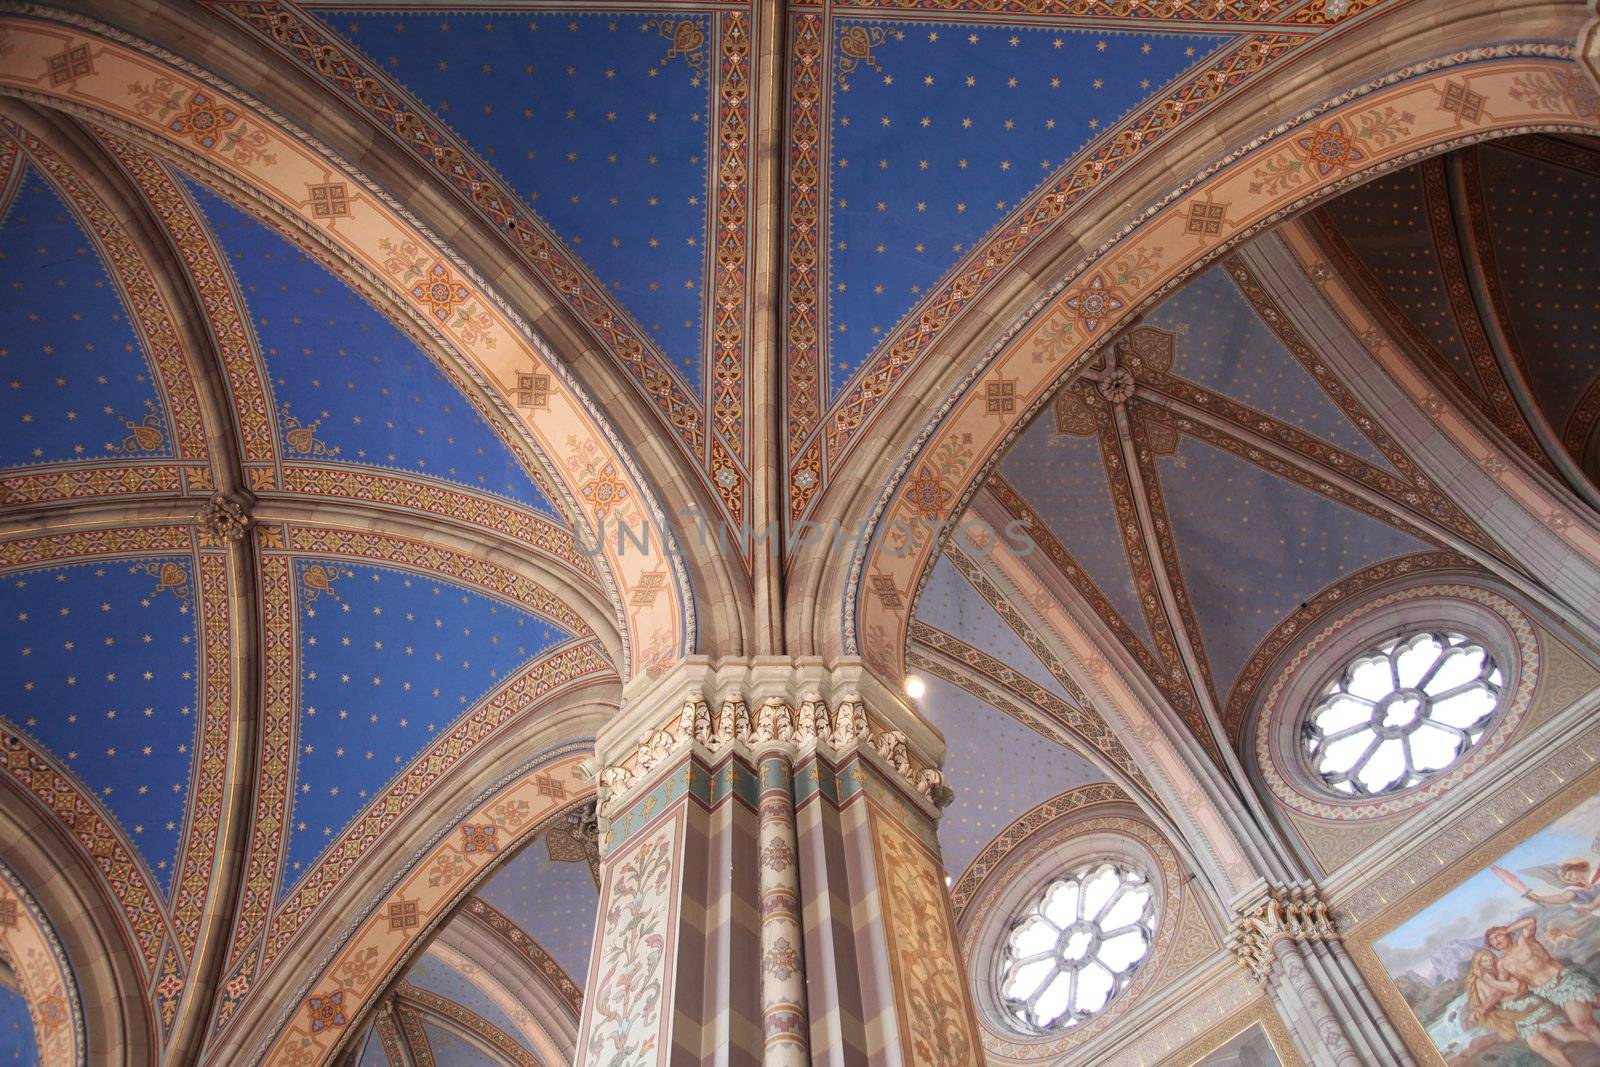 Ceiling of the church by atlas